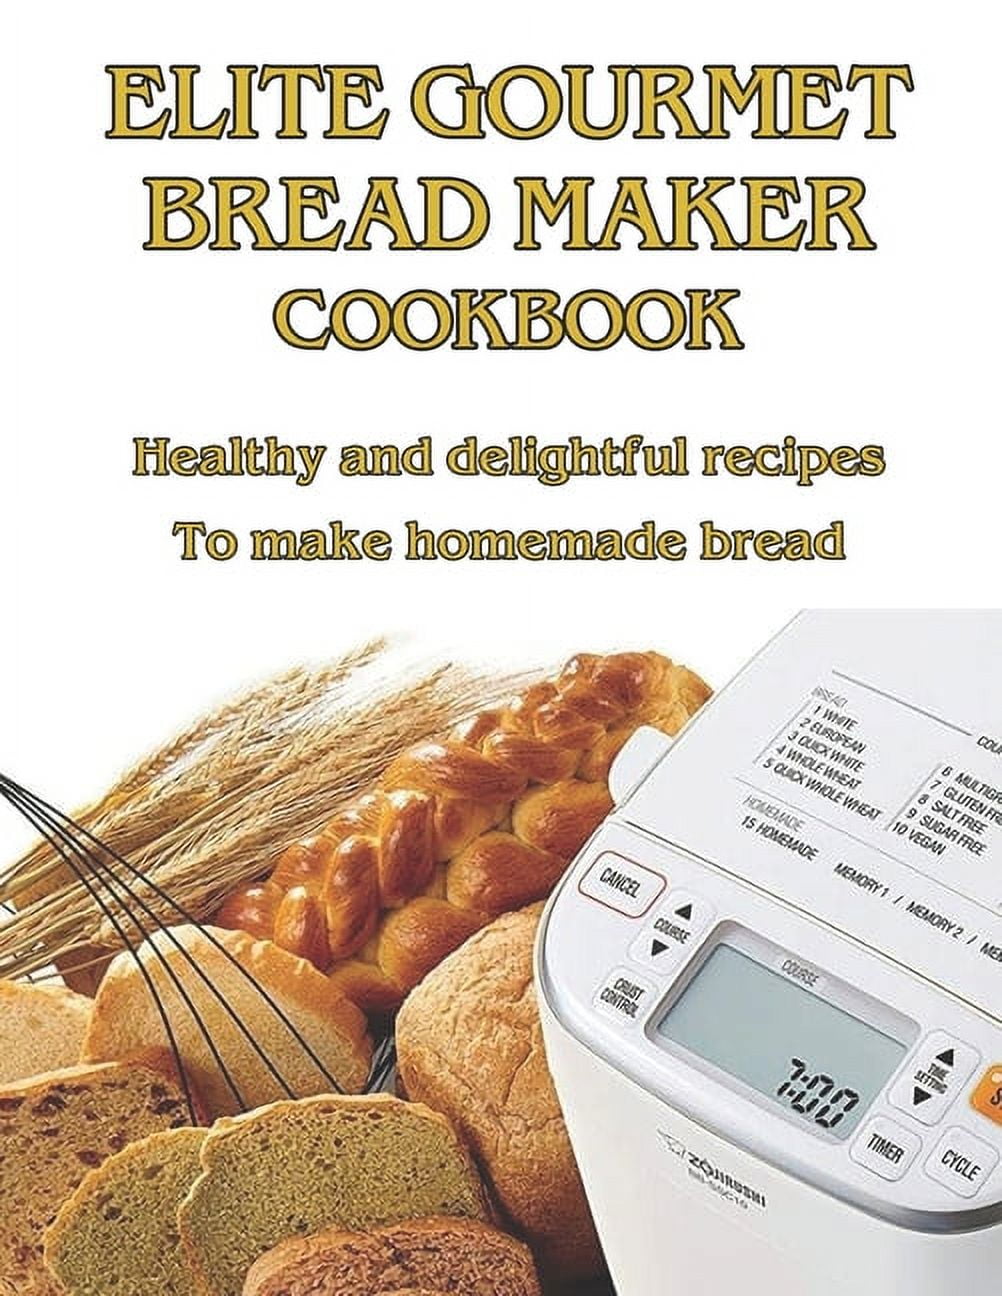 Elite Gourmet Bread Maker Cookbook: Healthy and Delightful Recipes to Make Homemade Bread [Book]